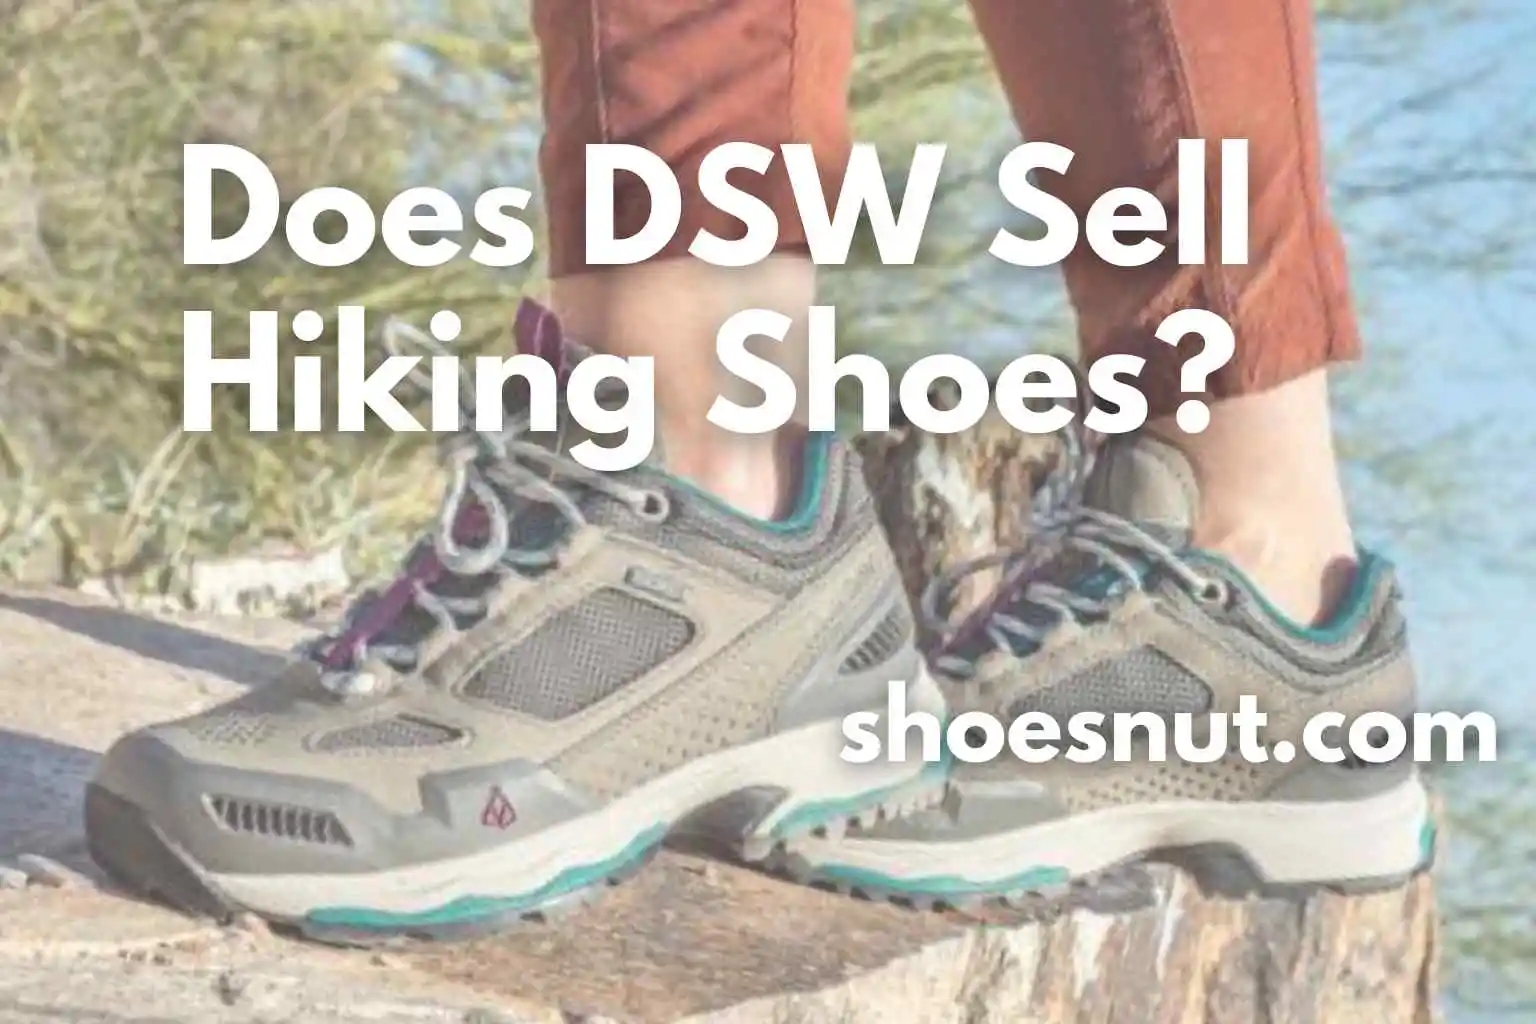 Does DSW Sell Hiking Shoes?